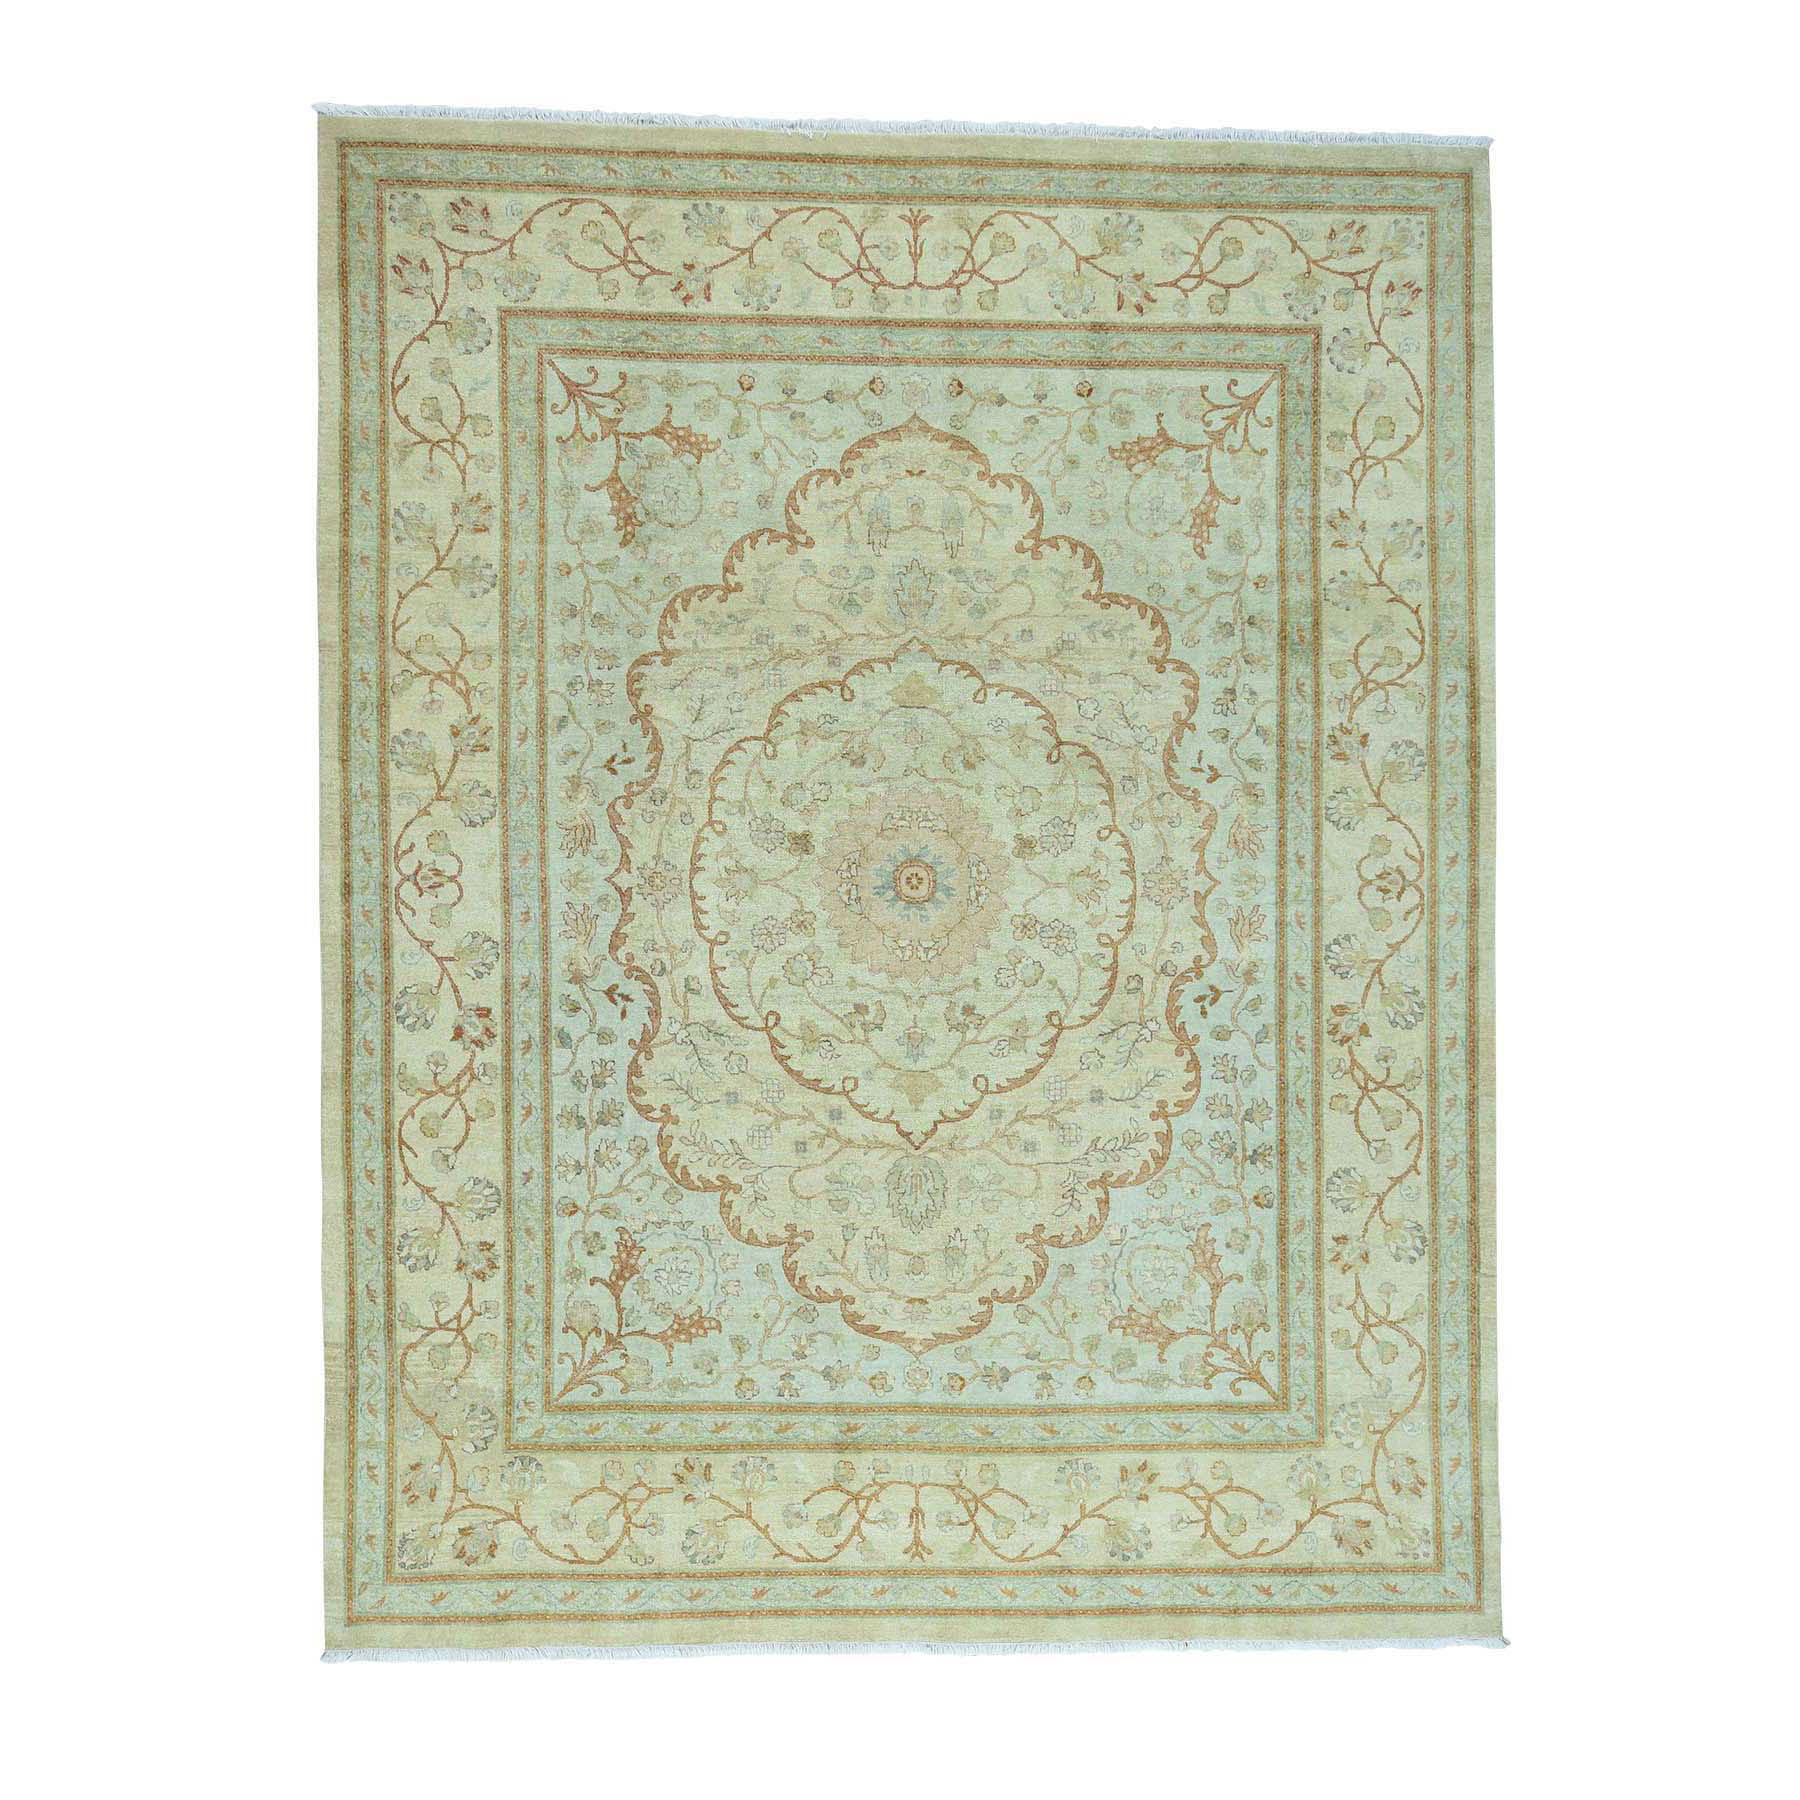 8'1"x10'5" Antiqued Tabriz with Pastel Colors Hand Woven Oriental Rug 